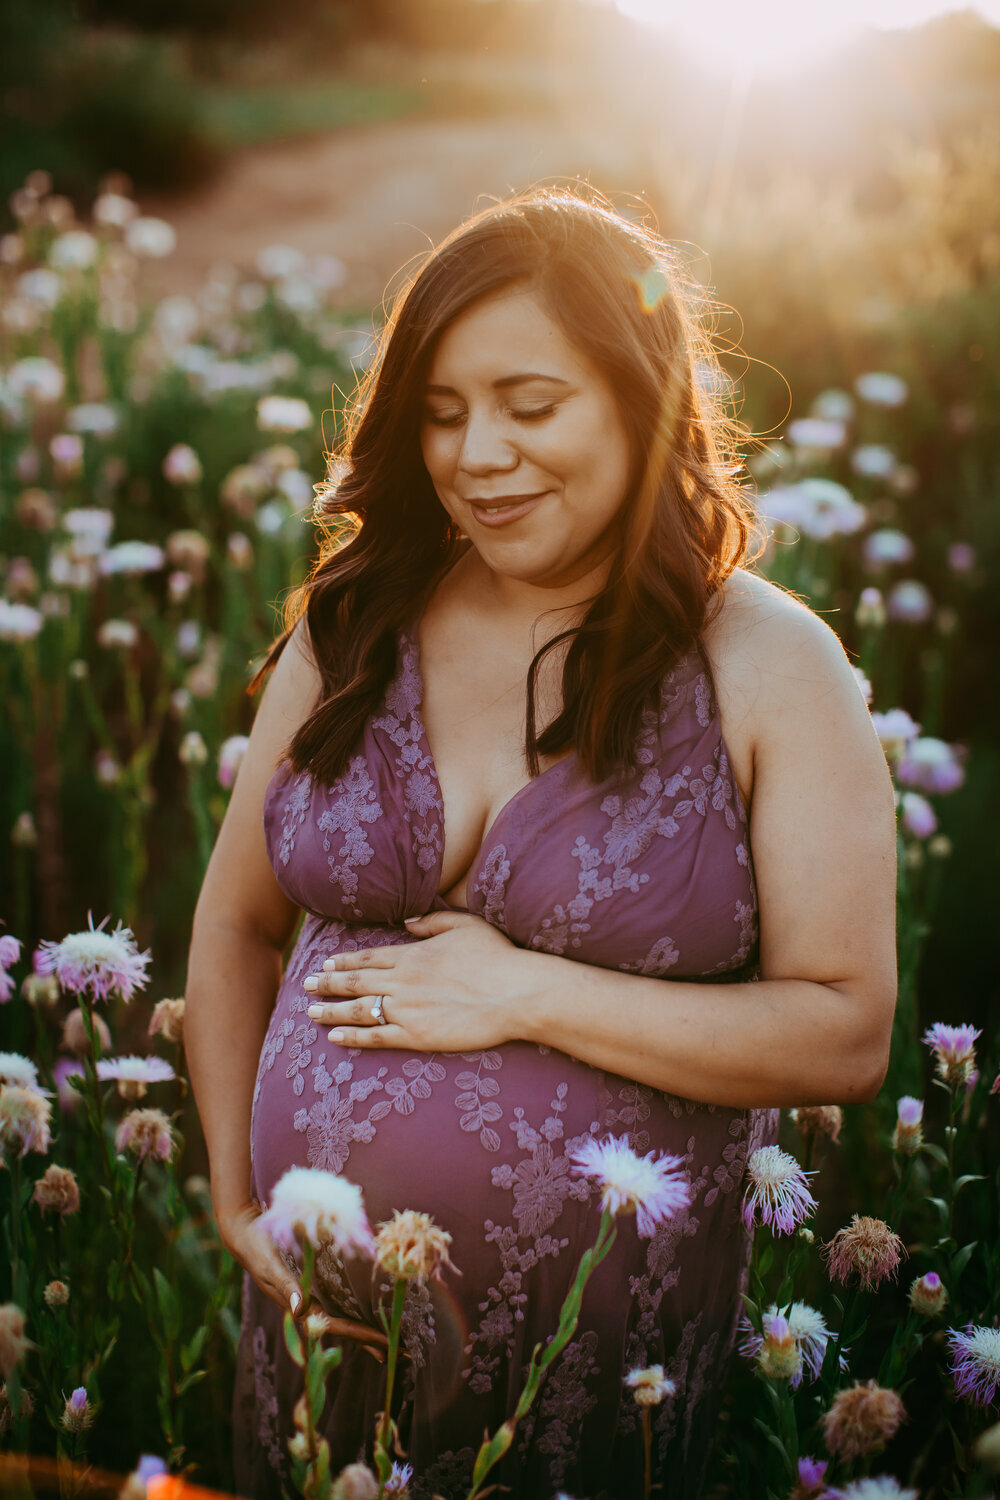  This maternity session had perfect lighting as the sun sunk beneath the wildflowers #tealawardphotography #texasmaternityphotographysession #amarillophotographer #amarilloematernityphotographer #emotionalphotography #lifestylephotography #babyontheway #lifestyles #expectingmom #newaddition #sweetbaby #motherhoodmagic 